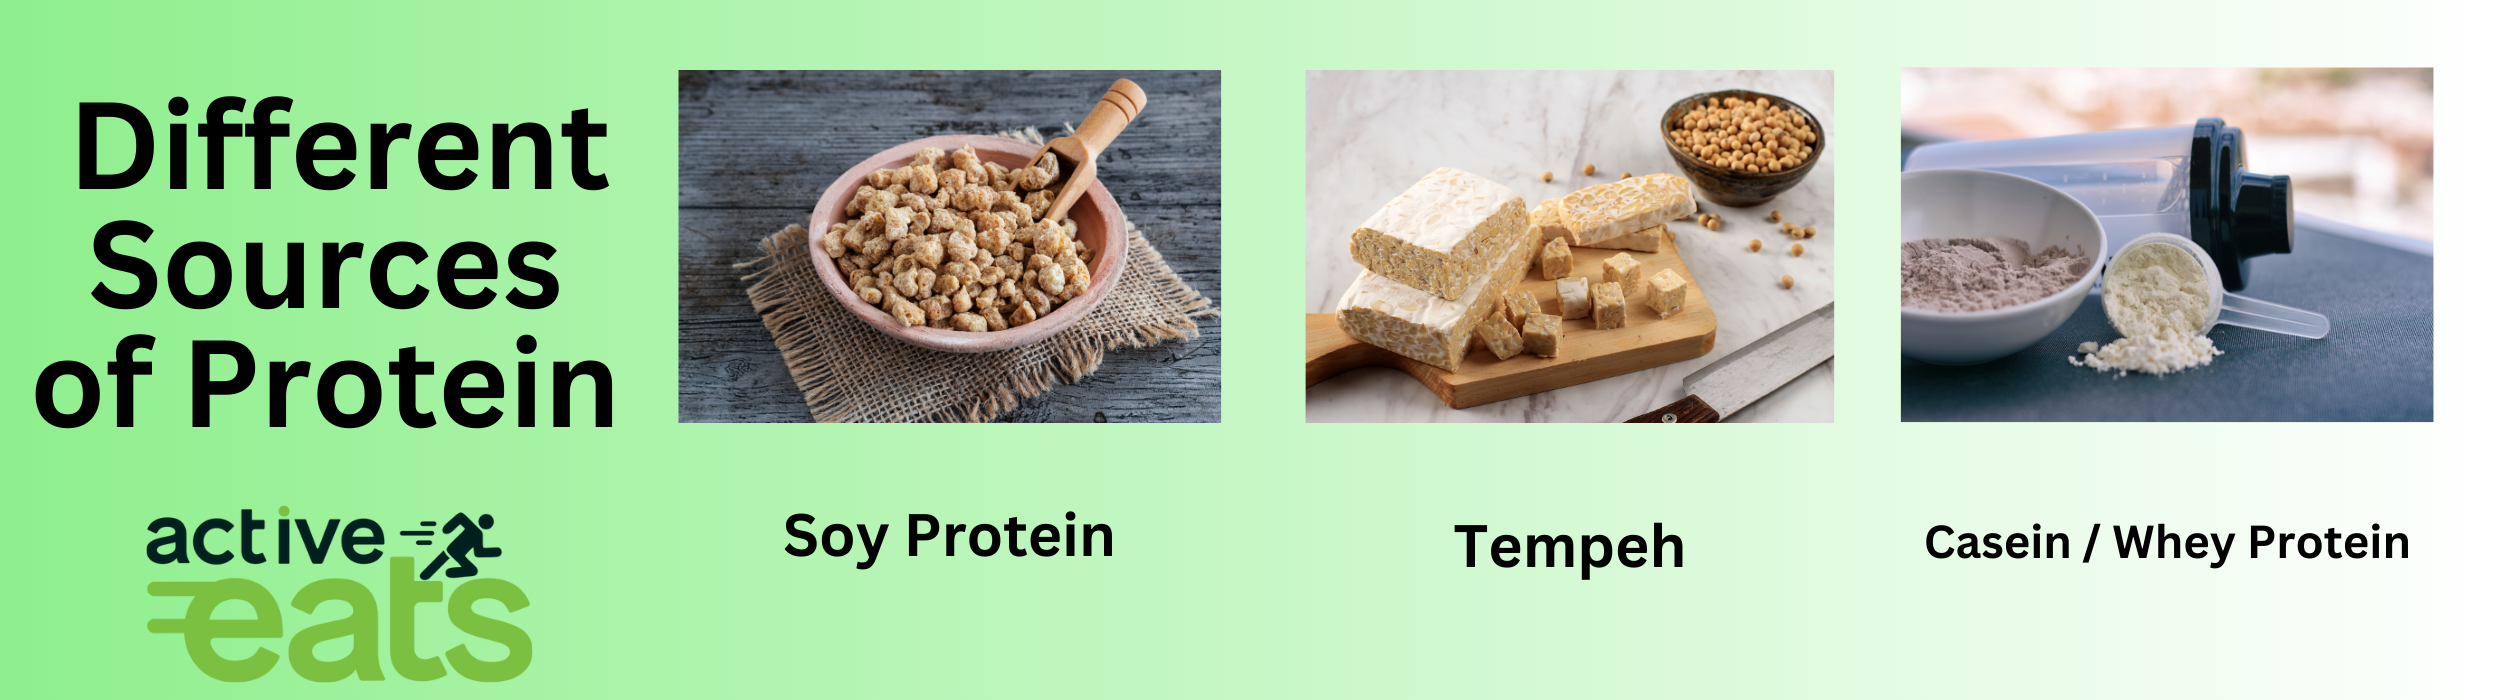 Image showing various sources of protein with their images. First source is Soy protein, next is Tempeh and third source is Casein or Whey protein.